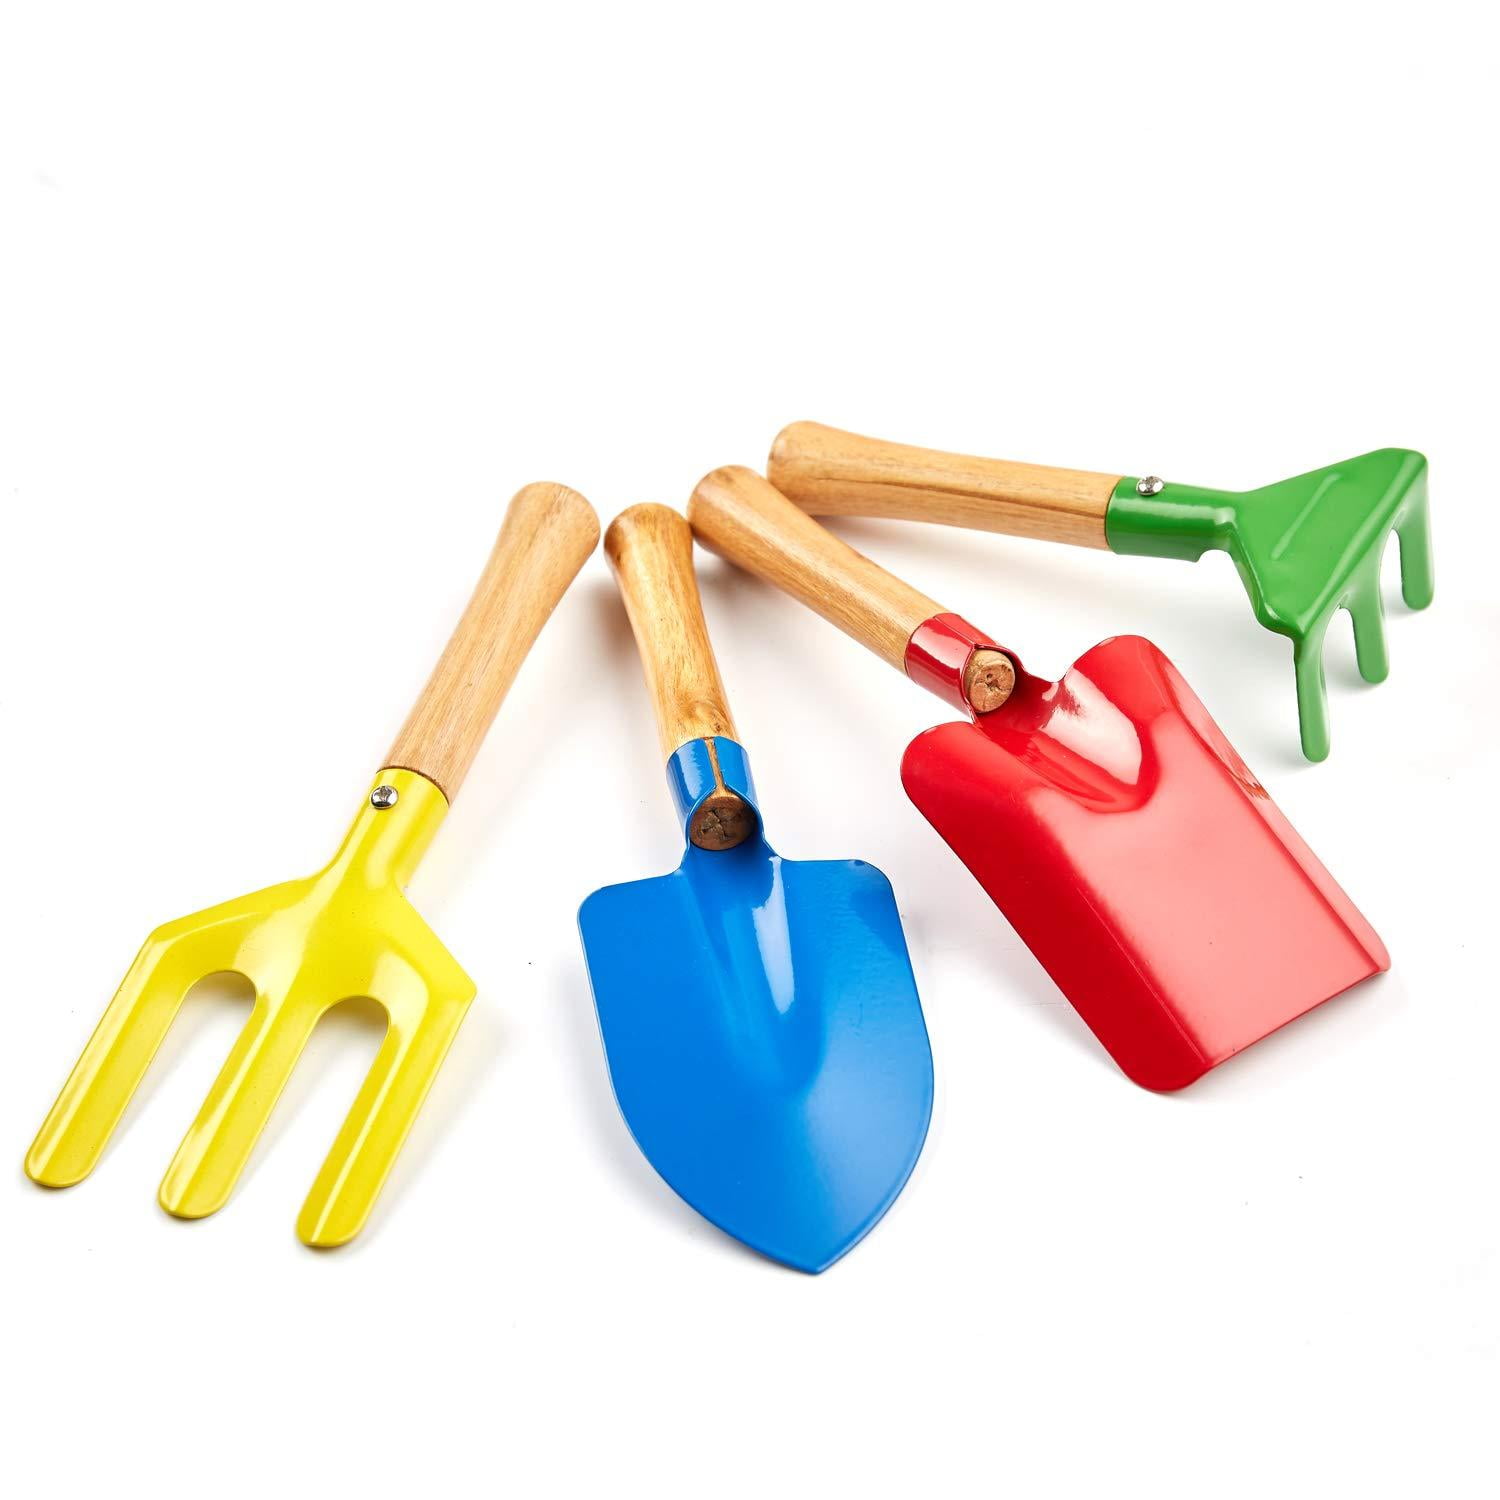 HiKin Kids 3-Piece Garden Tool Set with Trowel Rake and Shovel 2Pack Colorful Kid Gardening Tools Set Children Gardening Tools Set. Totally 2 Trowels, 2 Rakes and 2 Shovels 